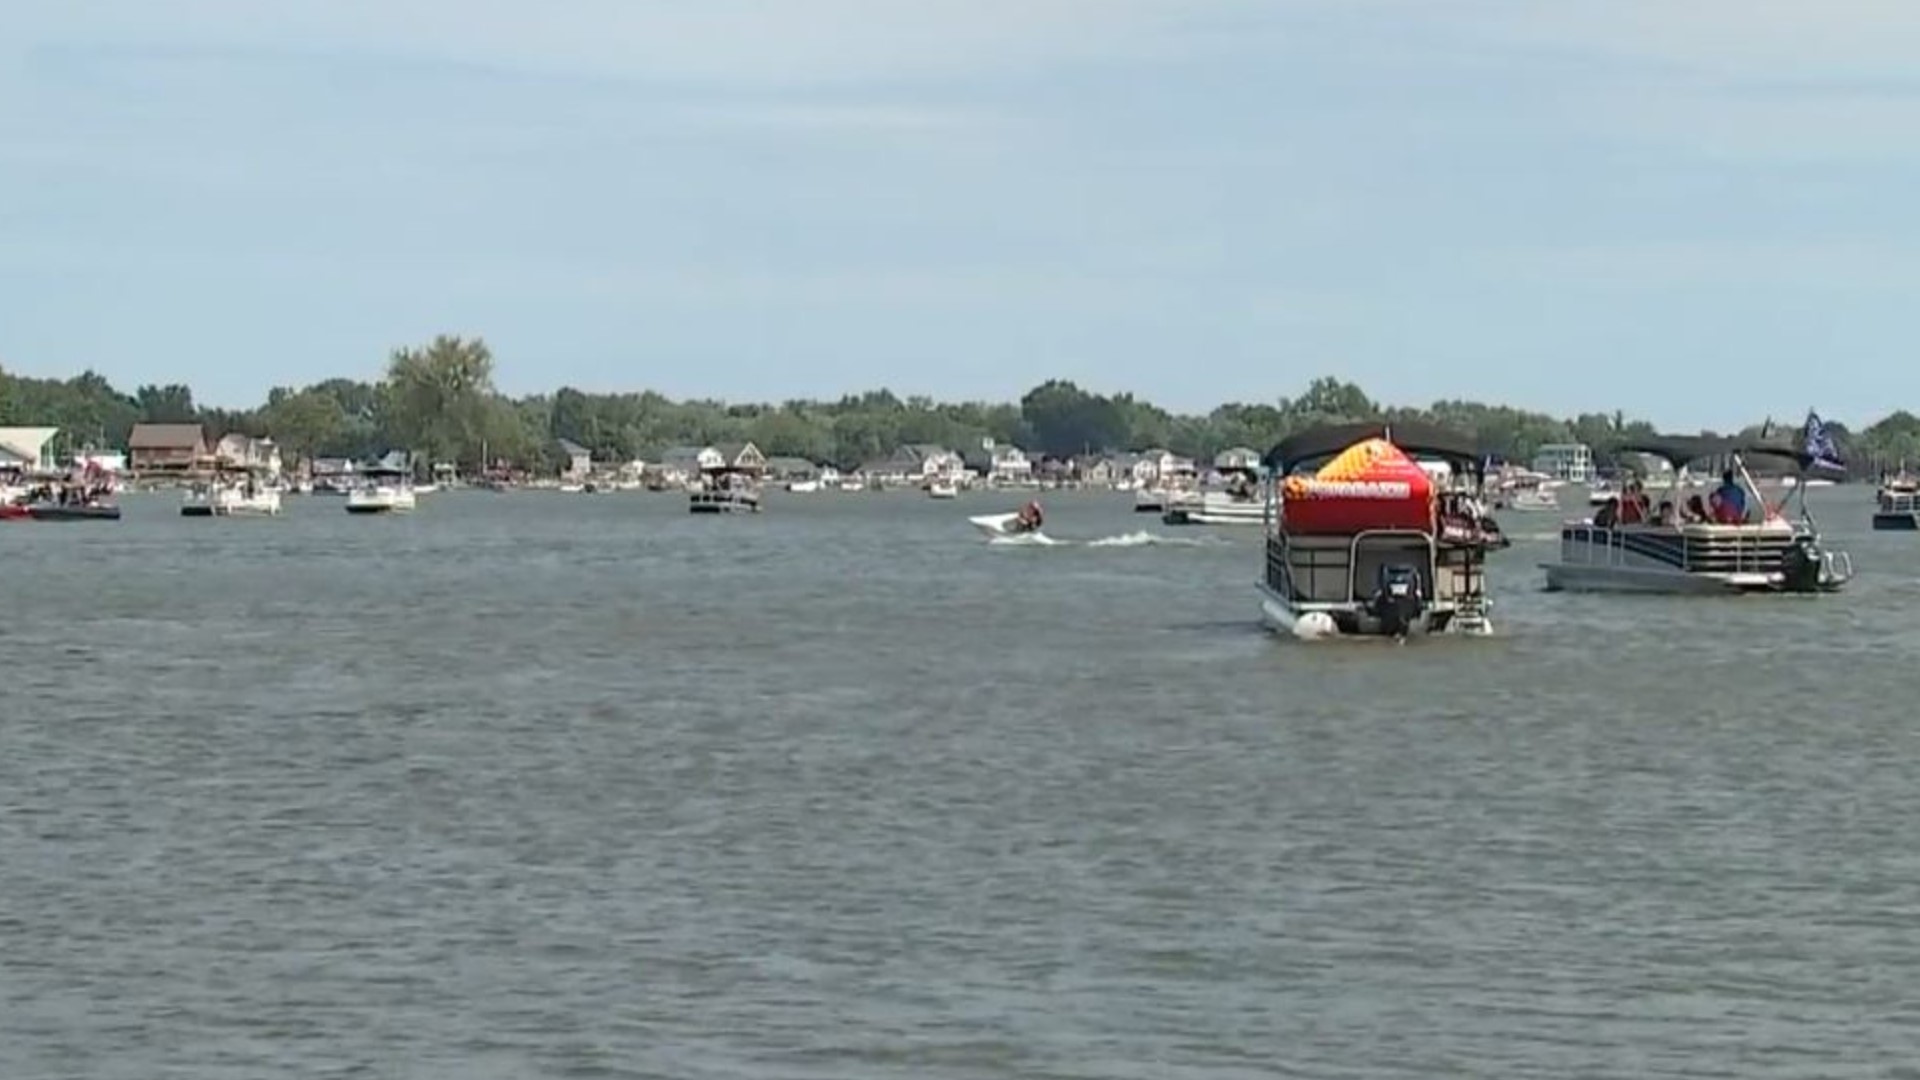 A beautiful Labor Day on Buckeye Lake brought out hundreds of boaters to the water.